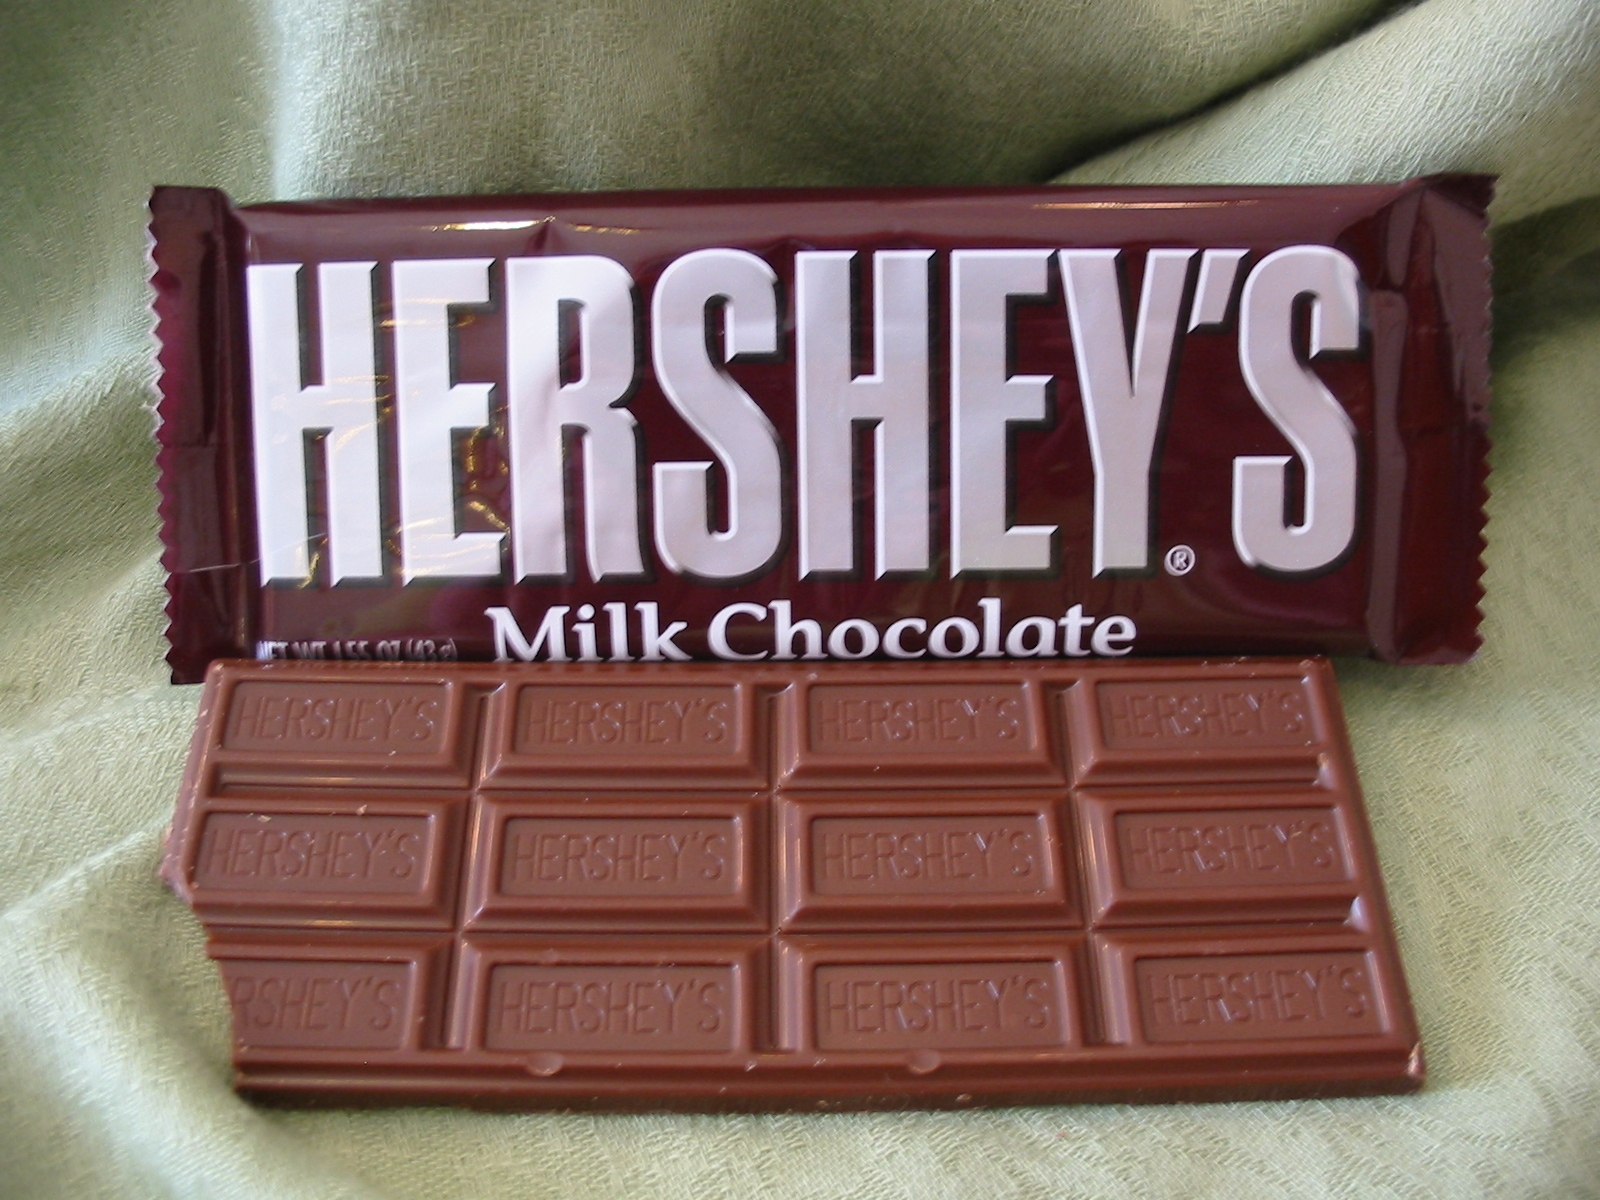 Hershey's was America's first big chocolate company and their fir...